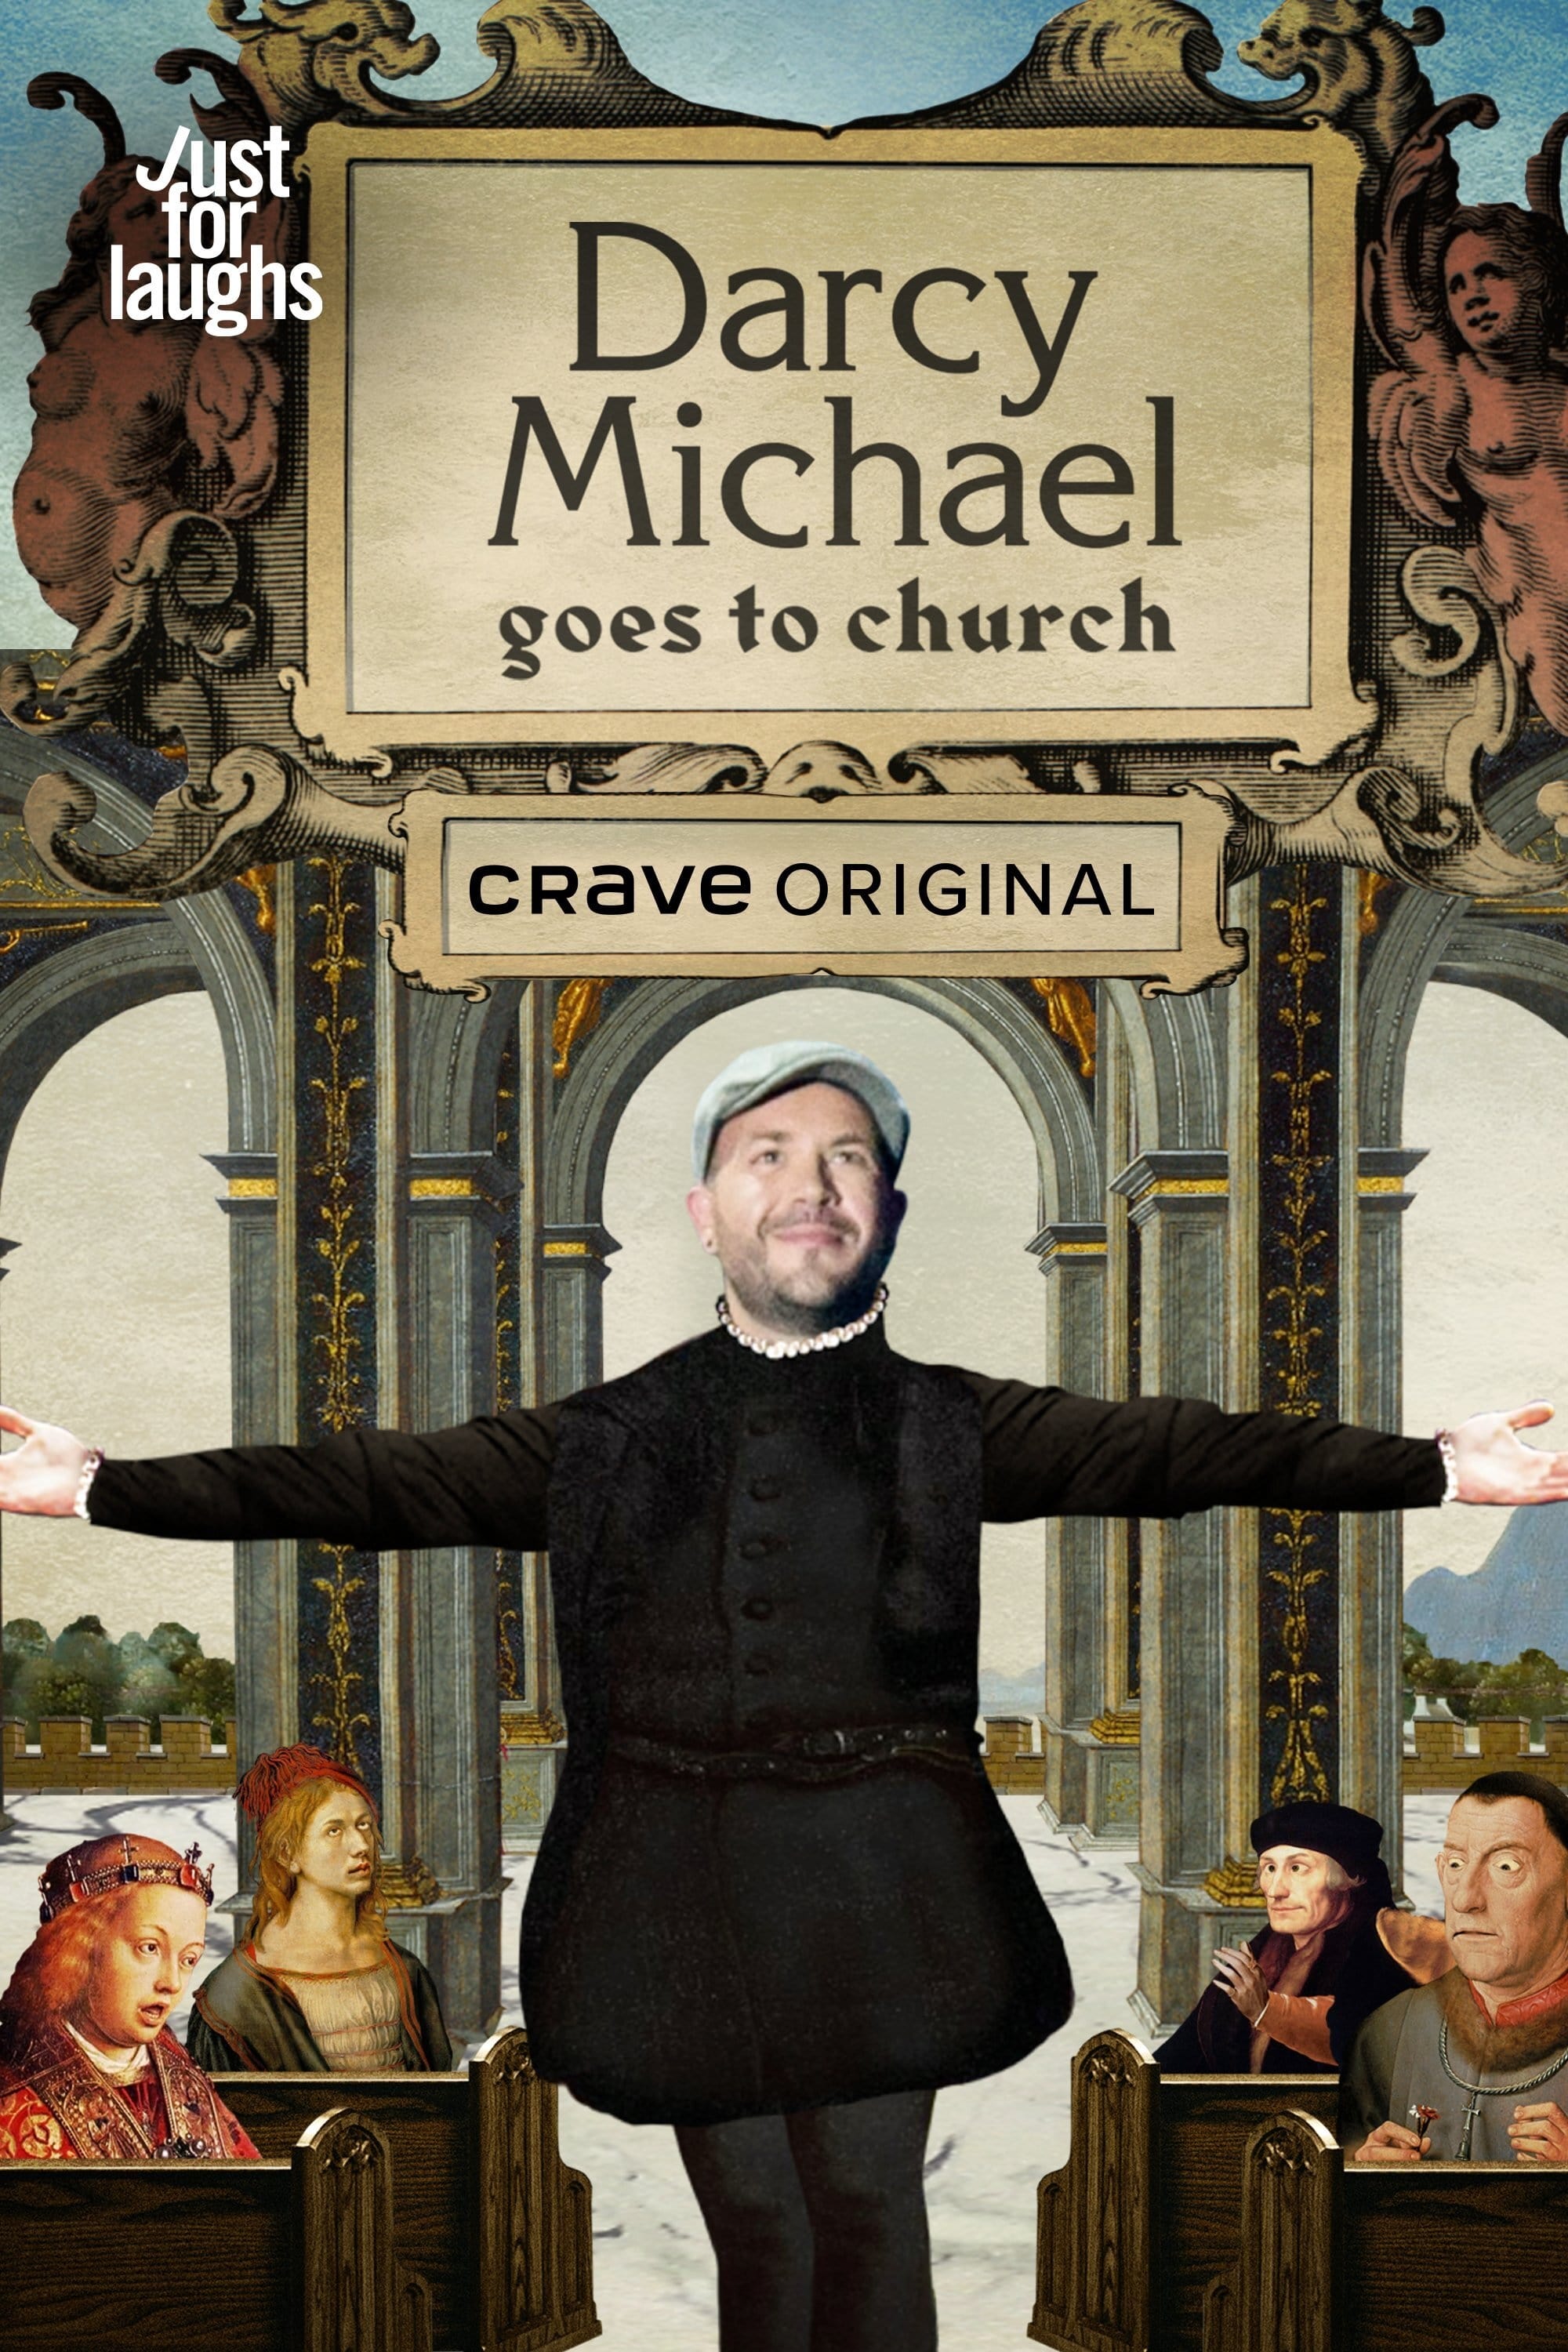 Darcy Michael Goes to Church